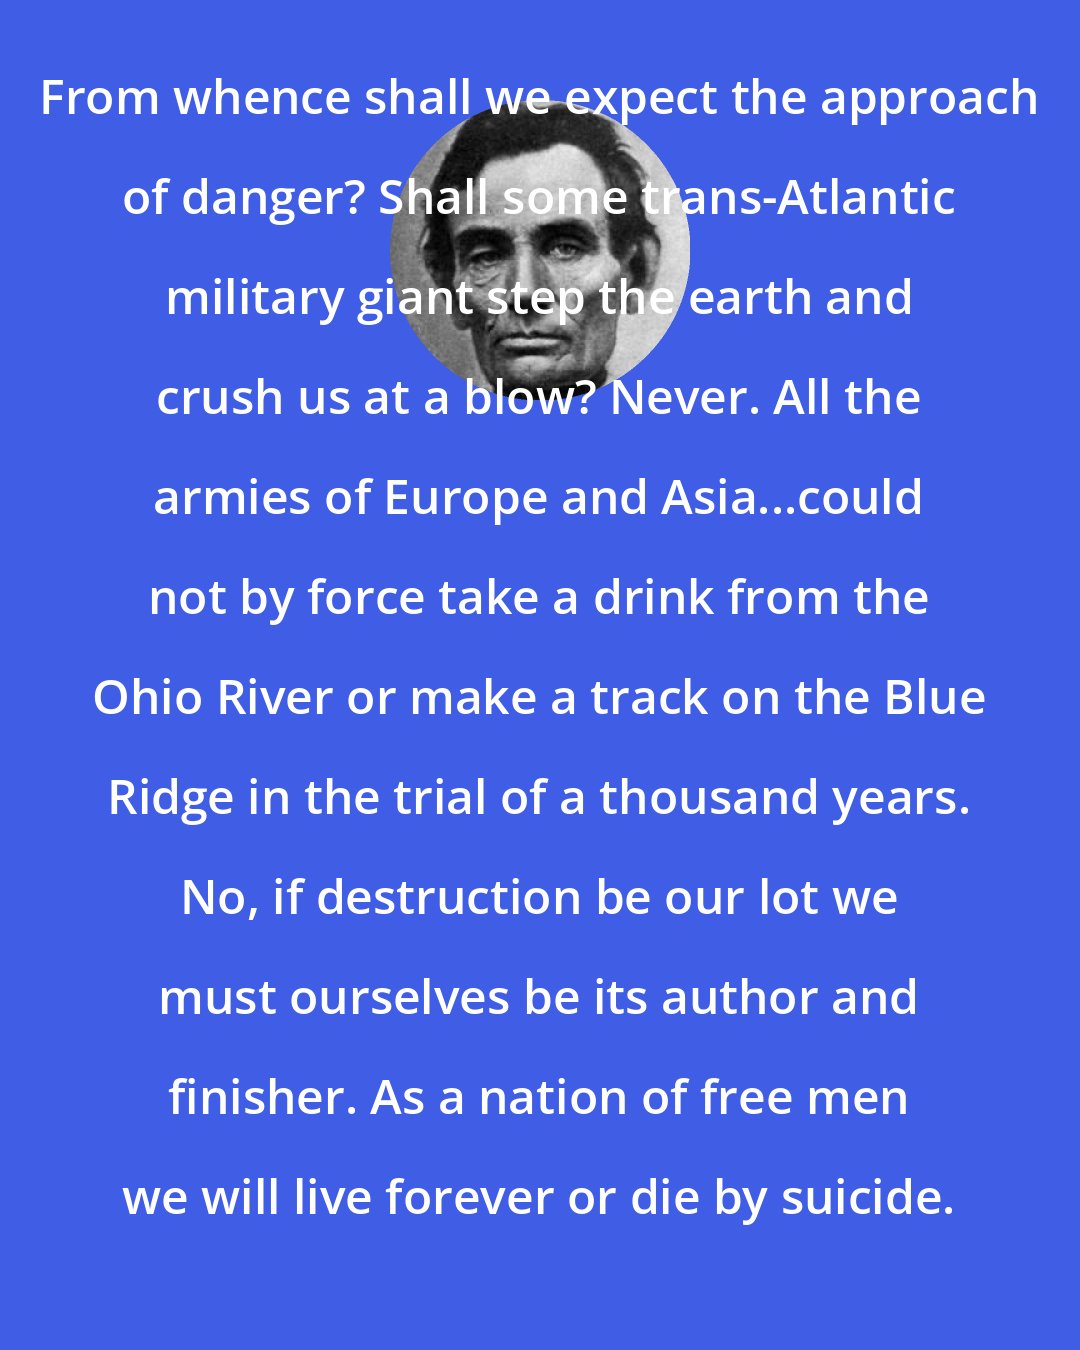 Abraham Lincoln: From whence shall we expect the approach of danger? Shall some trans-Atlantic military giant step the earth and crush us at a blow? Never. All the armies of Europe and Asia...could not by force take a drink from the Ohio River or make a track on the Blue Ridge in the trial of a thousand years. No, if destruction be our lot we must ourselves be its author and finisher. As a nation of free men we will live forever or die by suicide.